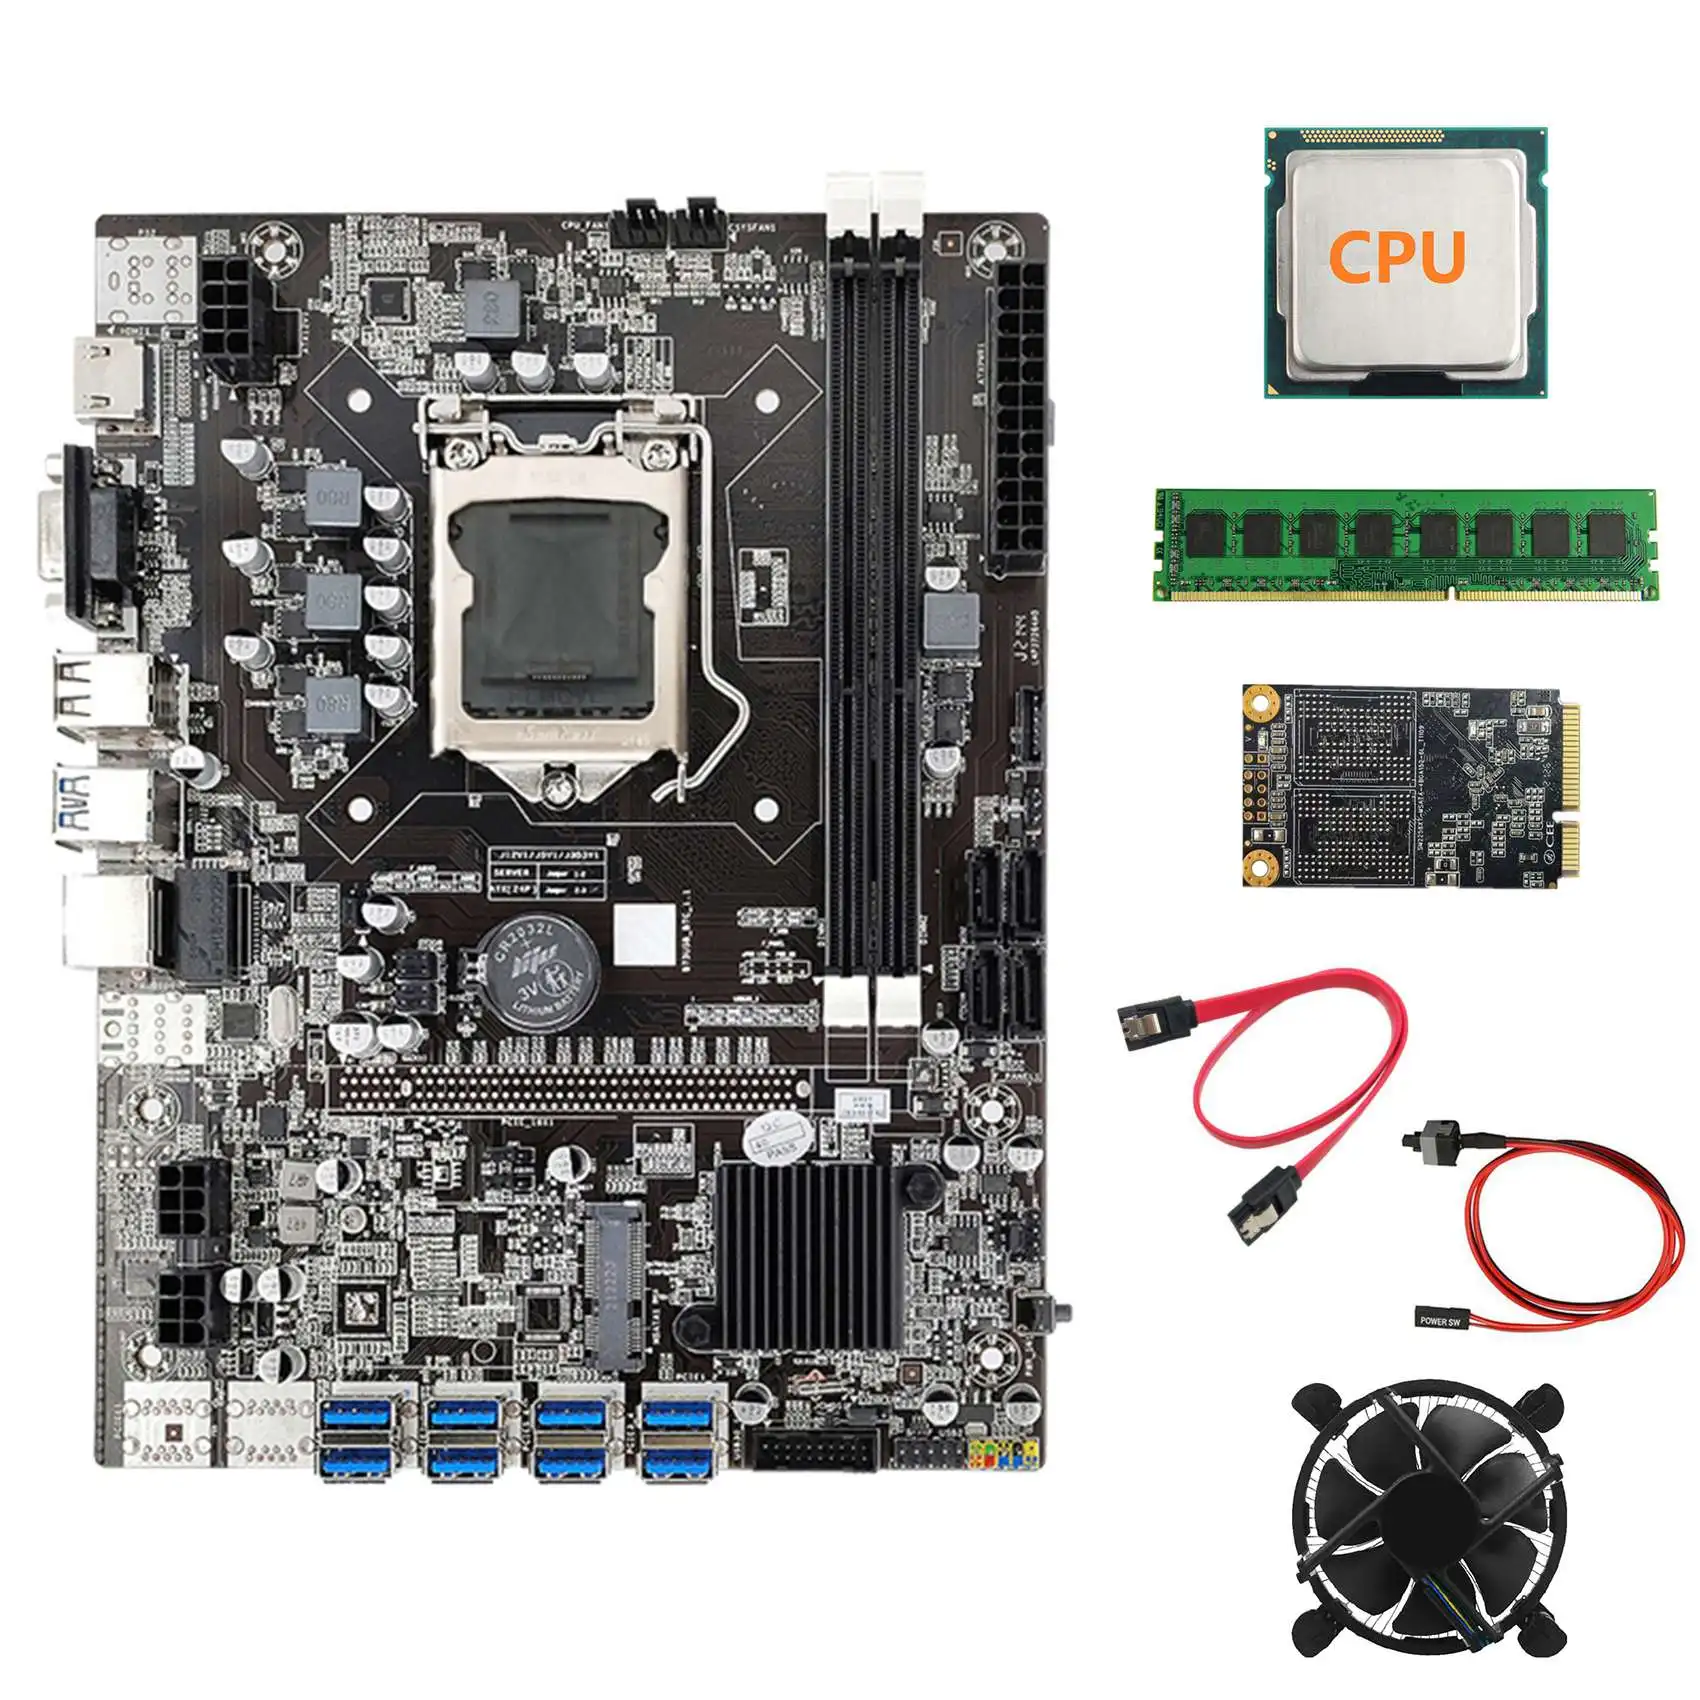 

B75 BTC Mining Motherboard+CPU+Fan+DDR3 4GB 1600Mhz RAM+128G SSD+SATA Cable+Switch Cable LGA1155 8XPCIE to USB Board